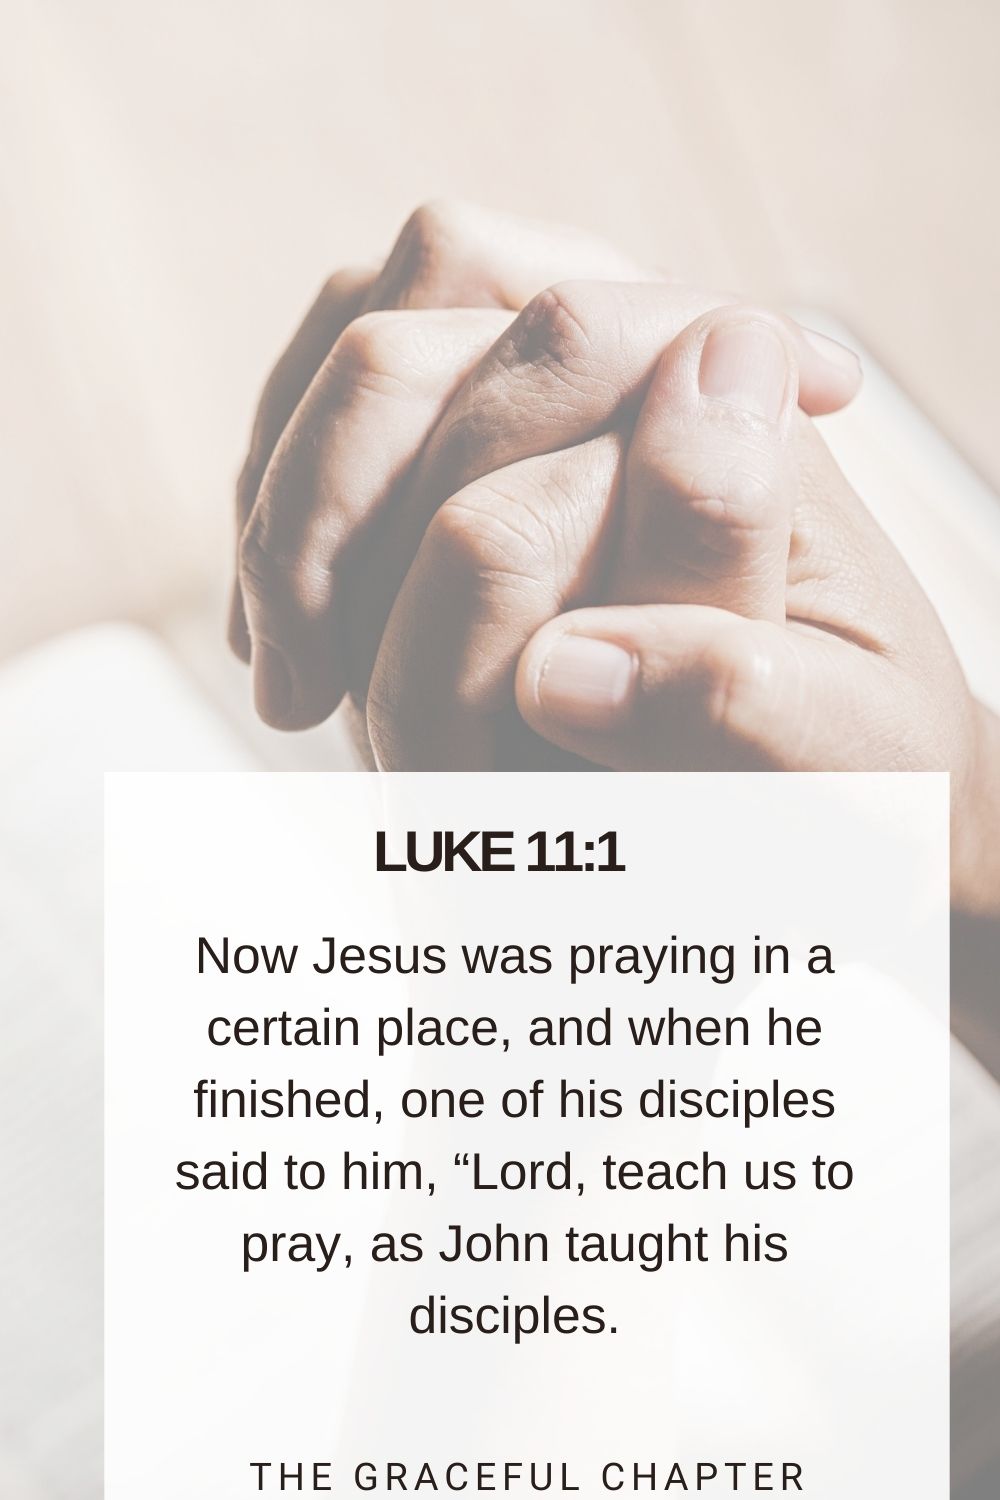 Now Jesus was praying in a certain place, and when he finished, one of his disciples said to him, “Lord, teach us to pray, as John taught his disciples. Luke 11:1